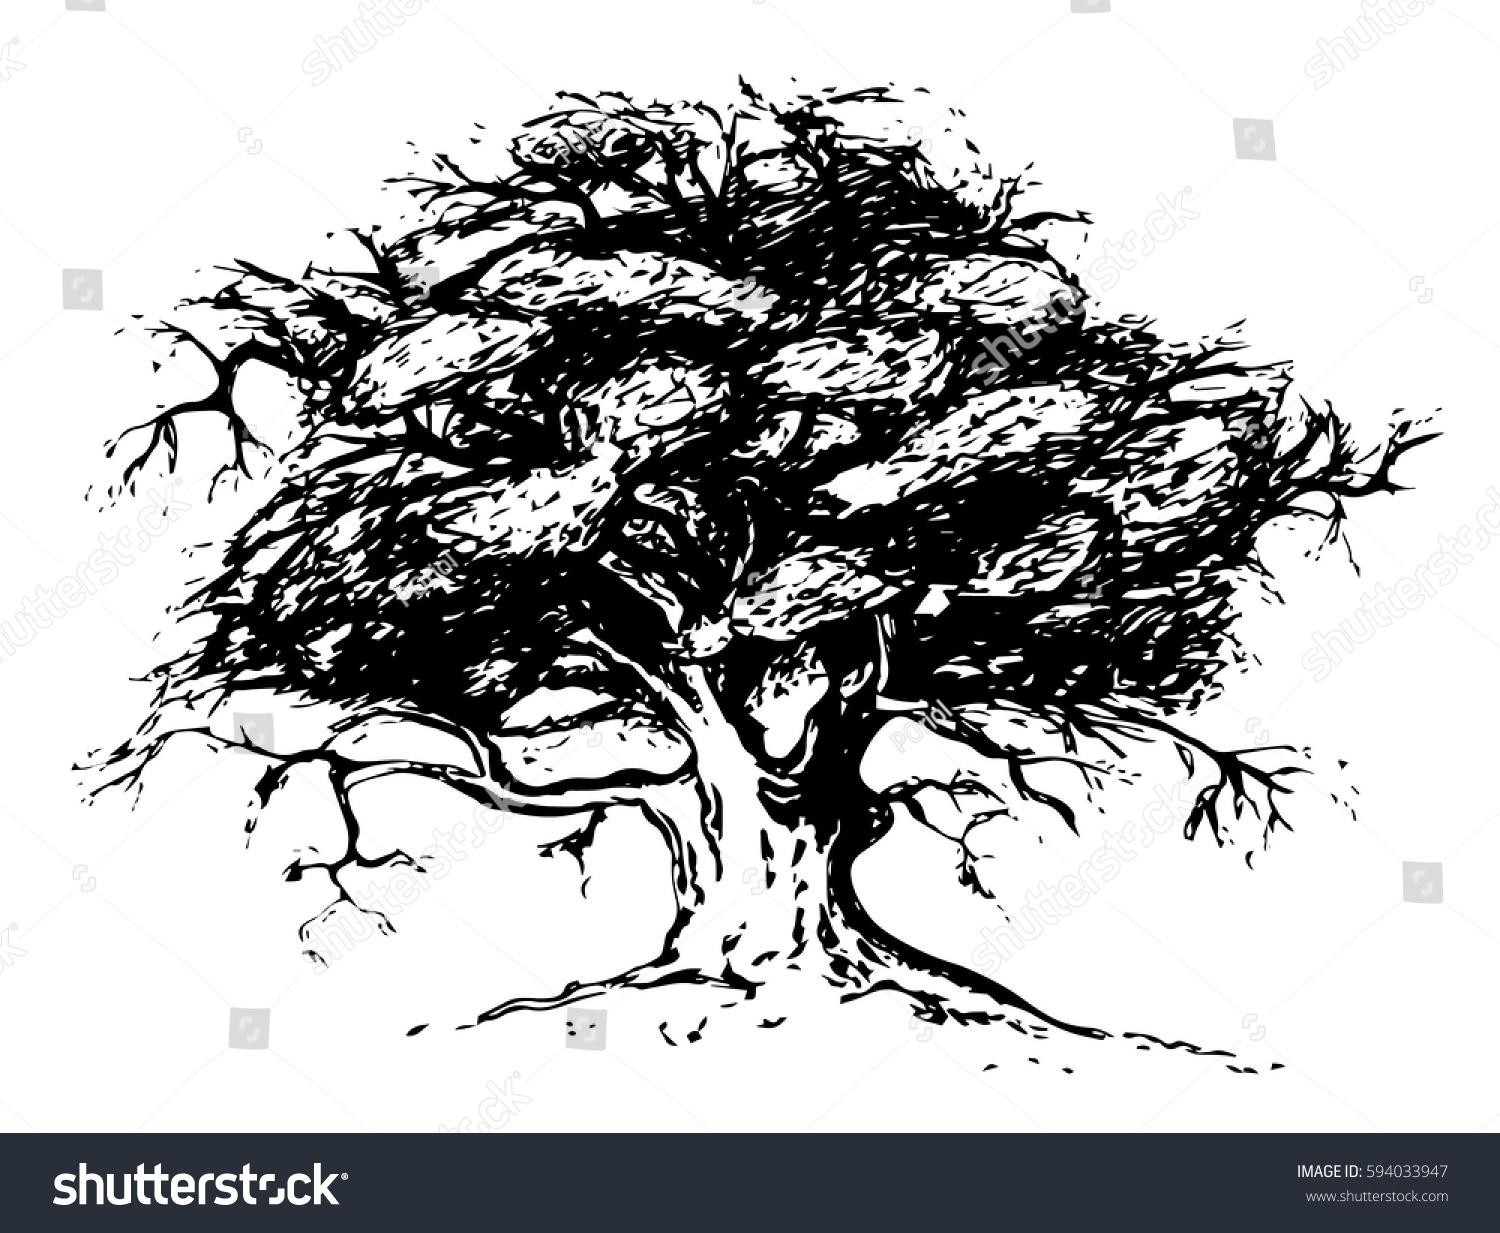 Stylized Vector Tree Illustration Transparent Background Stock Vector Royalty Free 594033947